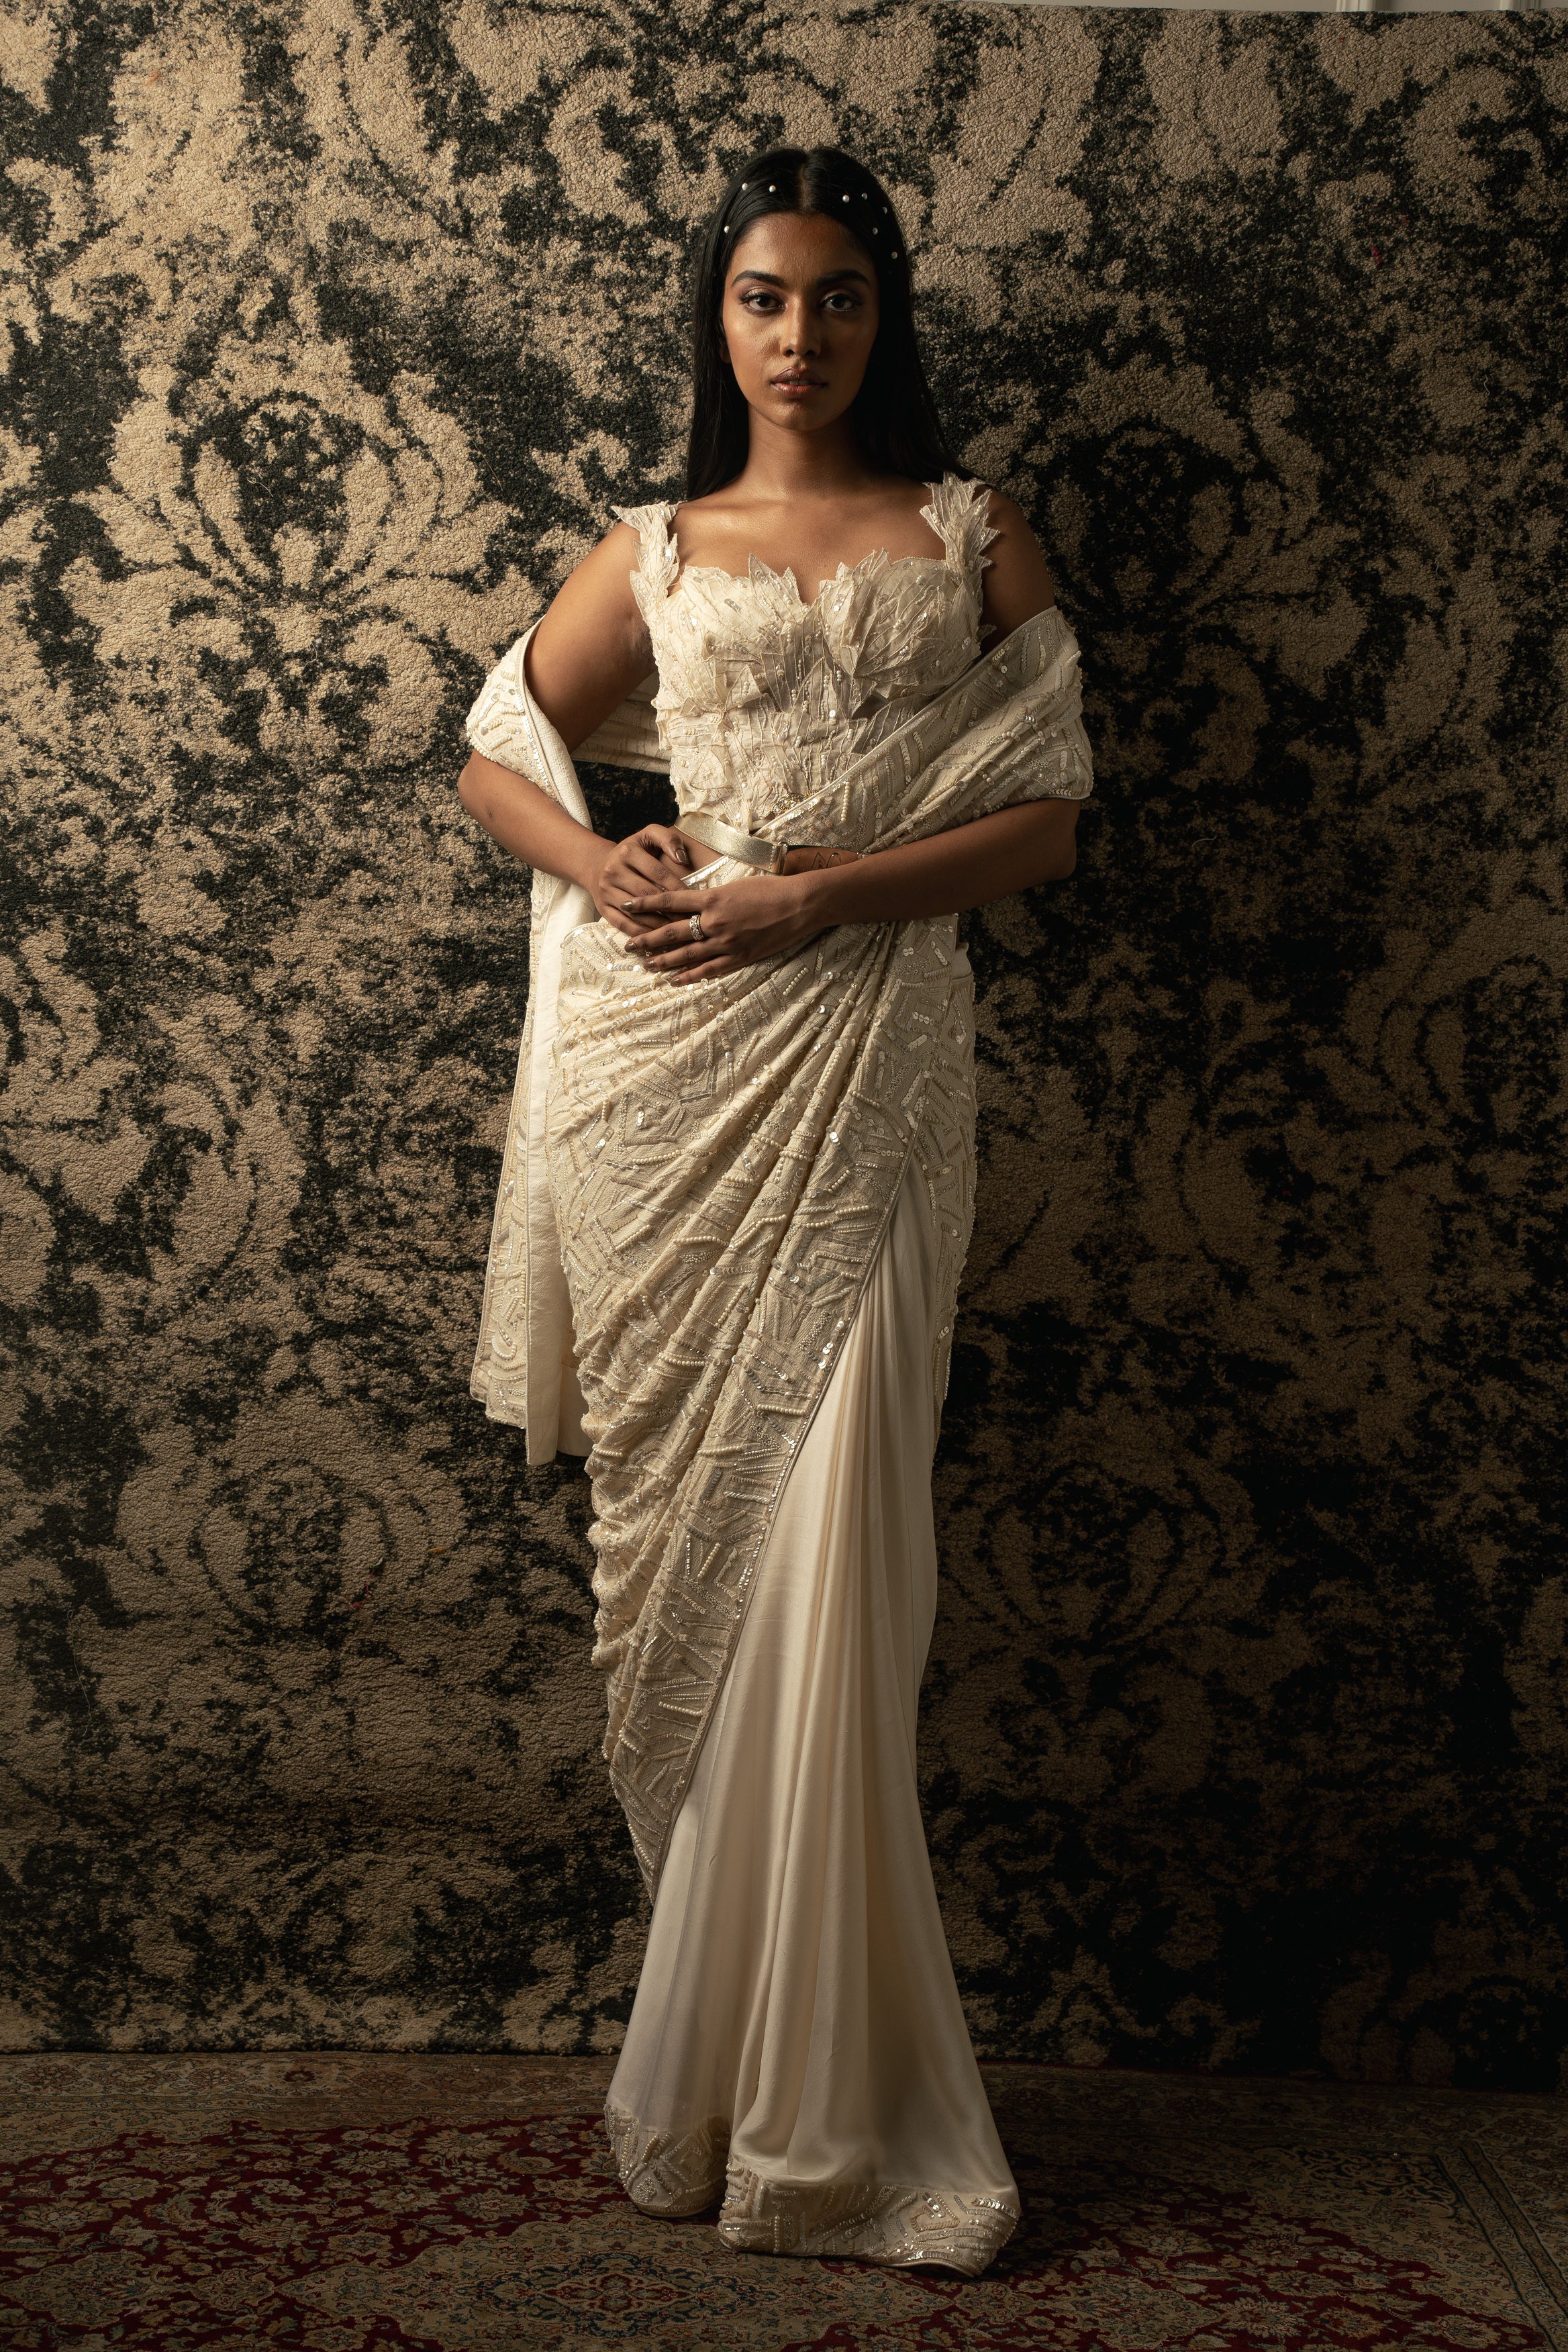 Drape yourself in elegance: Ivory Silk Satin and Georgette Saree adorned with intricate thread embroidery, paired with a delicate Net blouse and satin stretch petticoat.